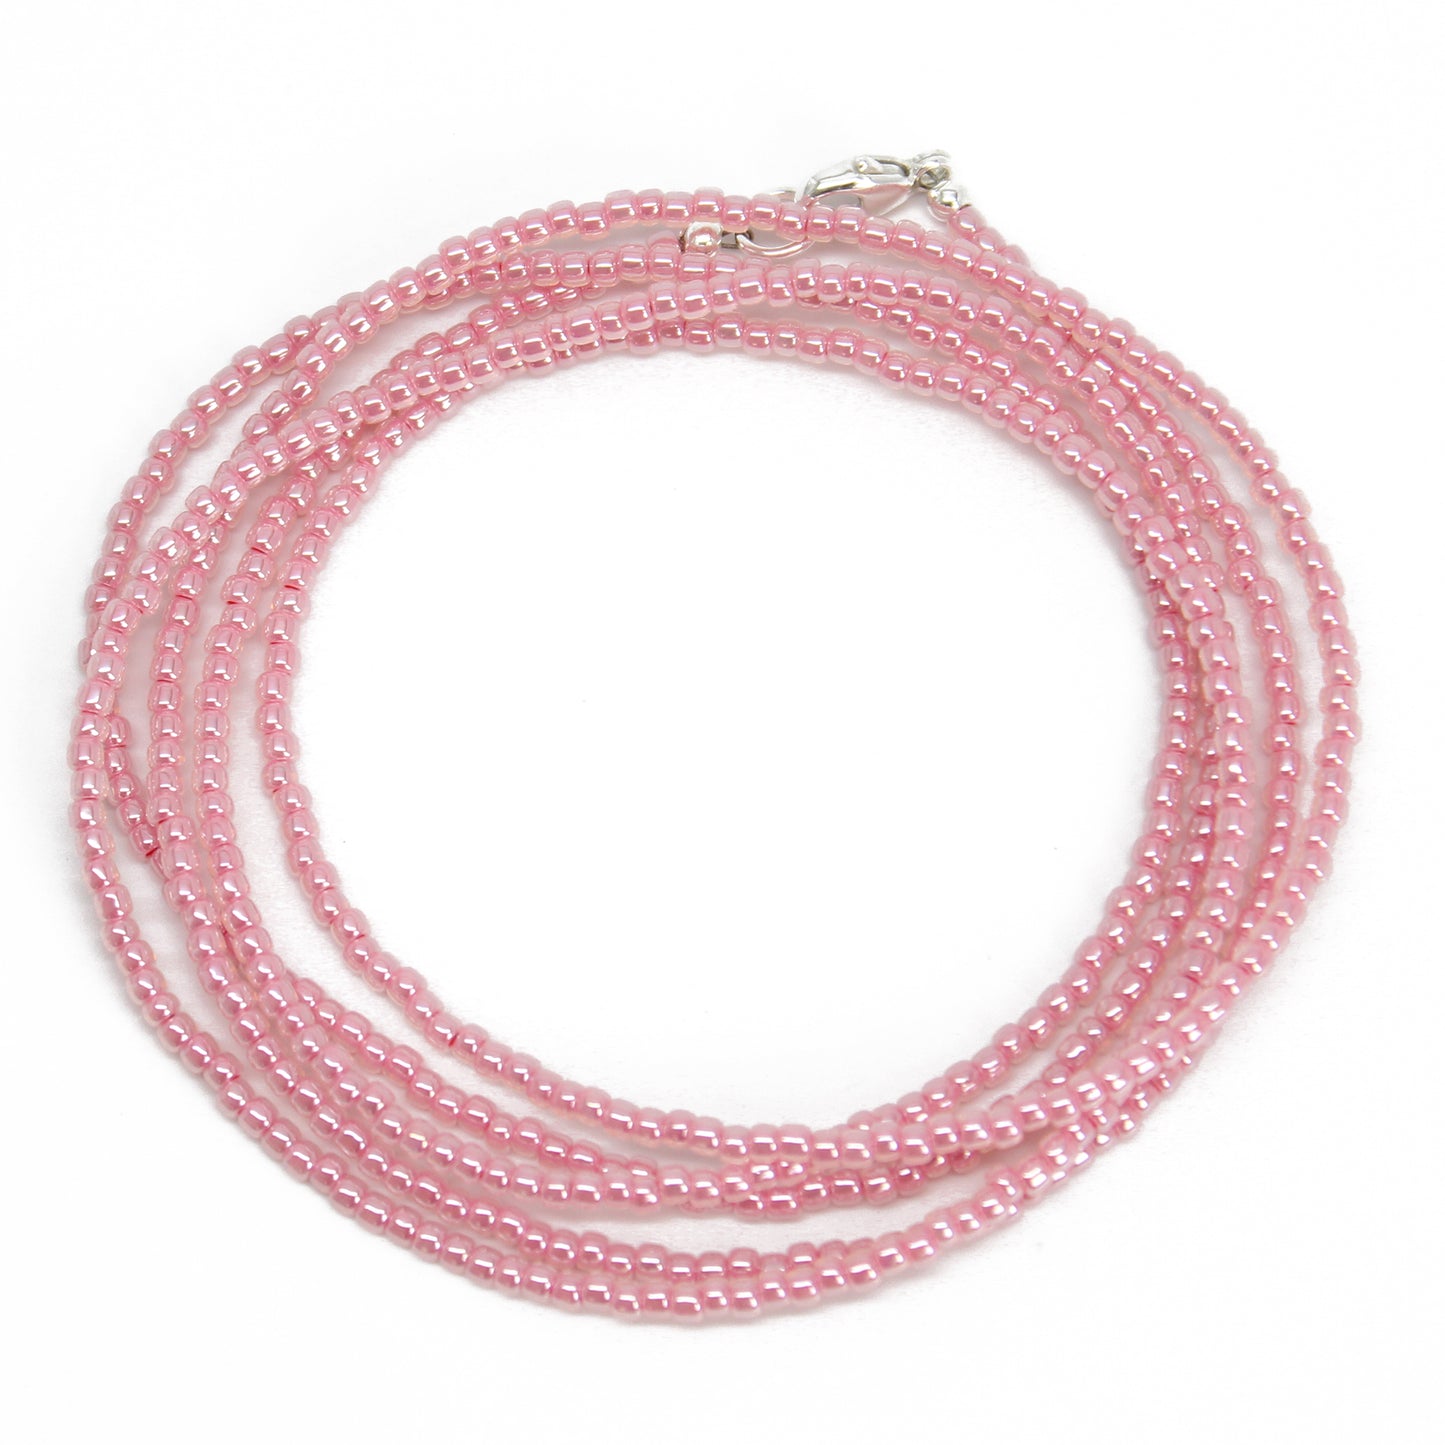 Impatiens Pink Seed Bead Necklace, Thin 1.5mm Single Strand 66